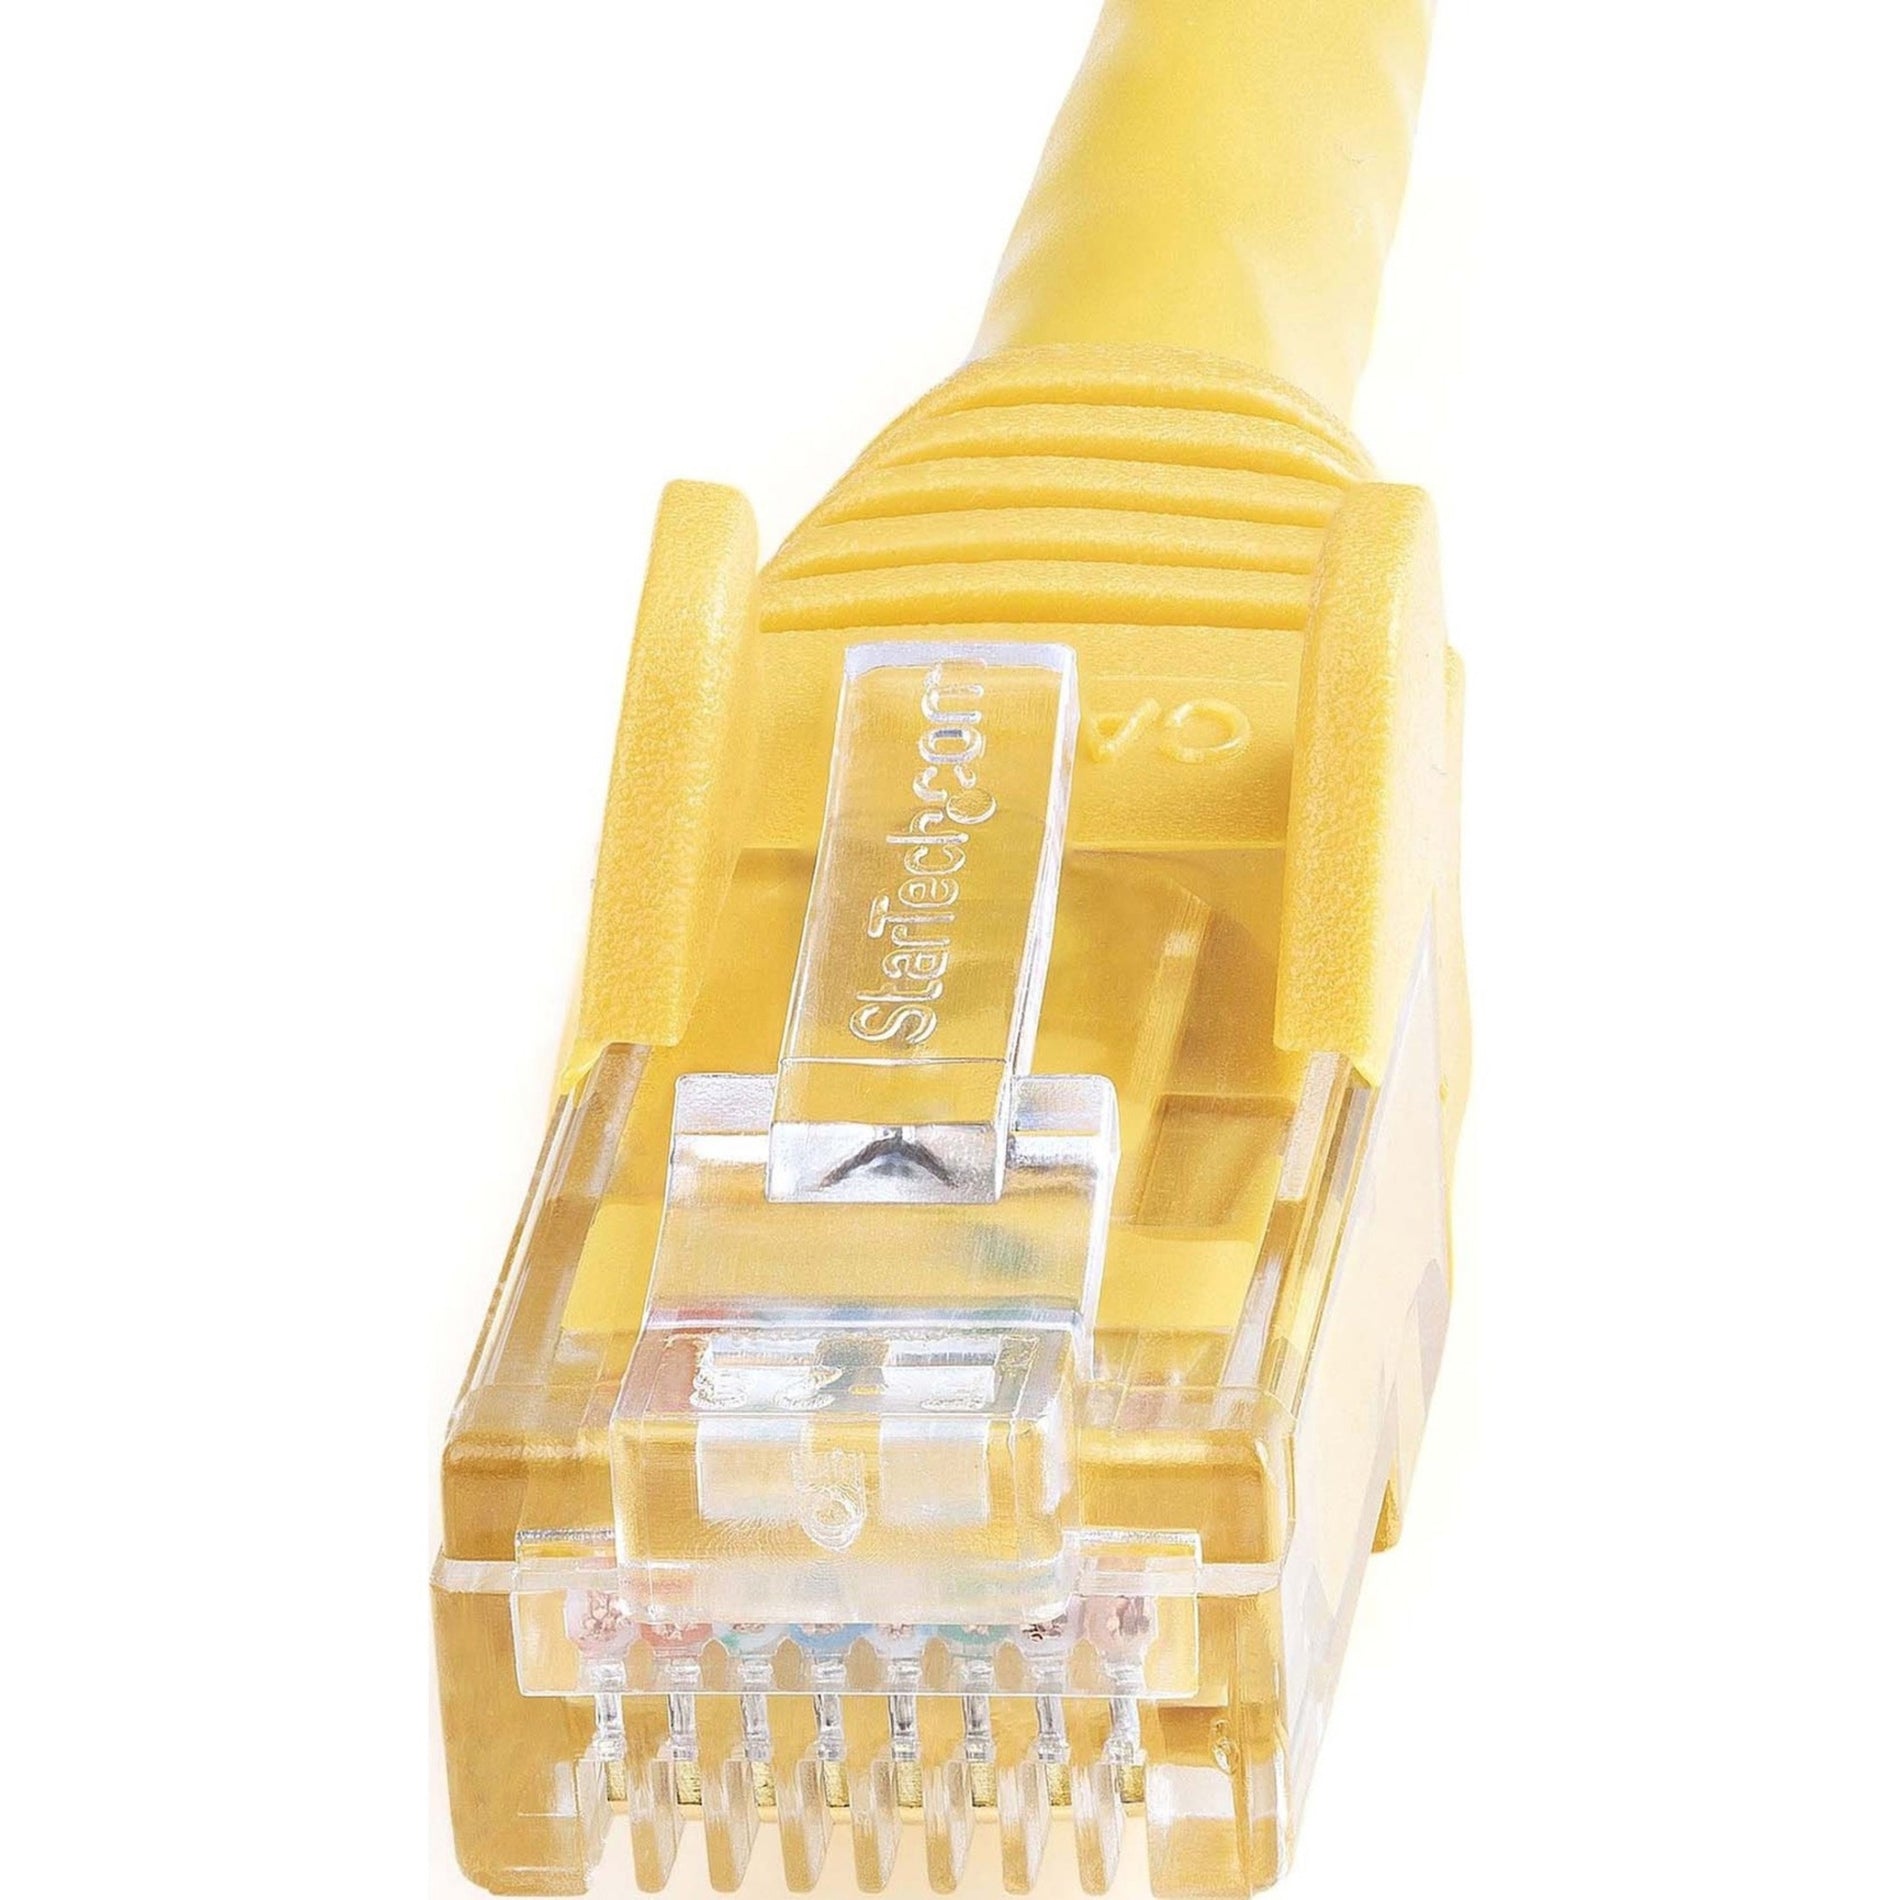 StarTech.com N6PATCH10YL 10 ft Yellow Snagless Cat6 UTP Patch Cable, Lifetime Warranty, UL Listed, ETL Verified, 10 Gbit/s Data Transfer Rate, RJ45 Connector Clip Protectors